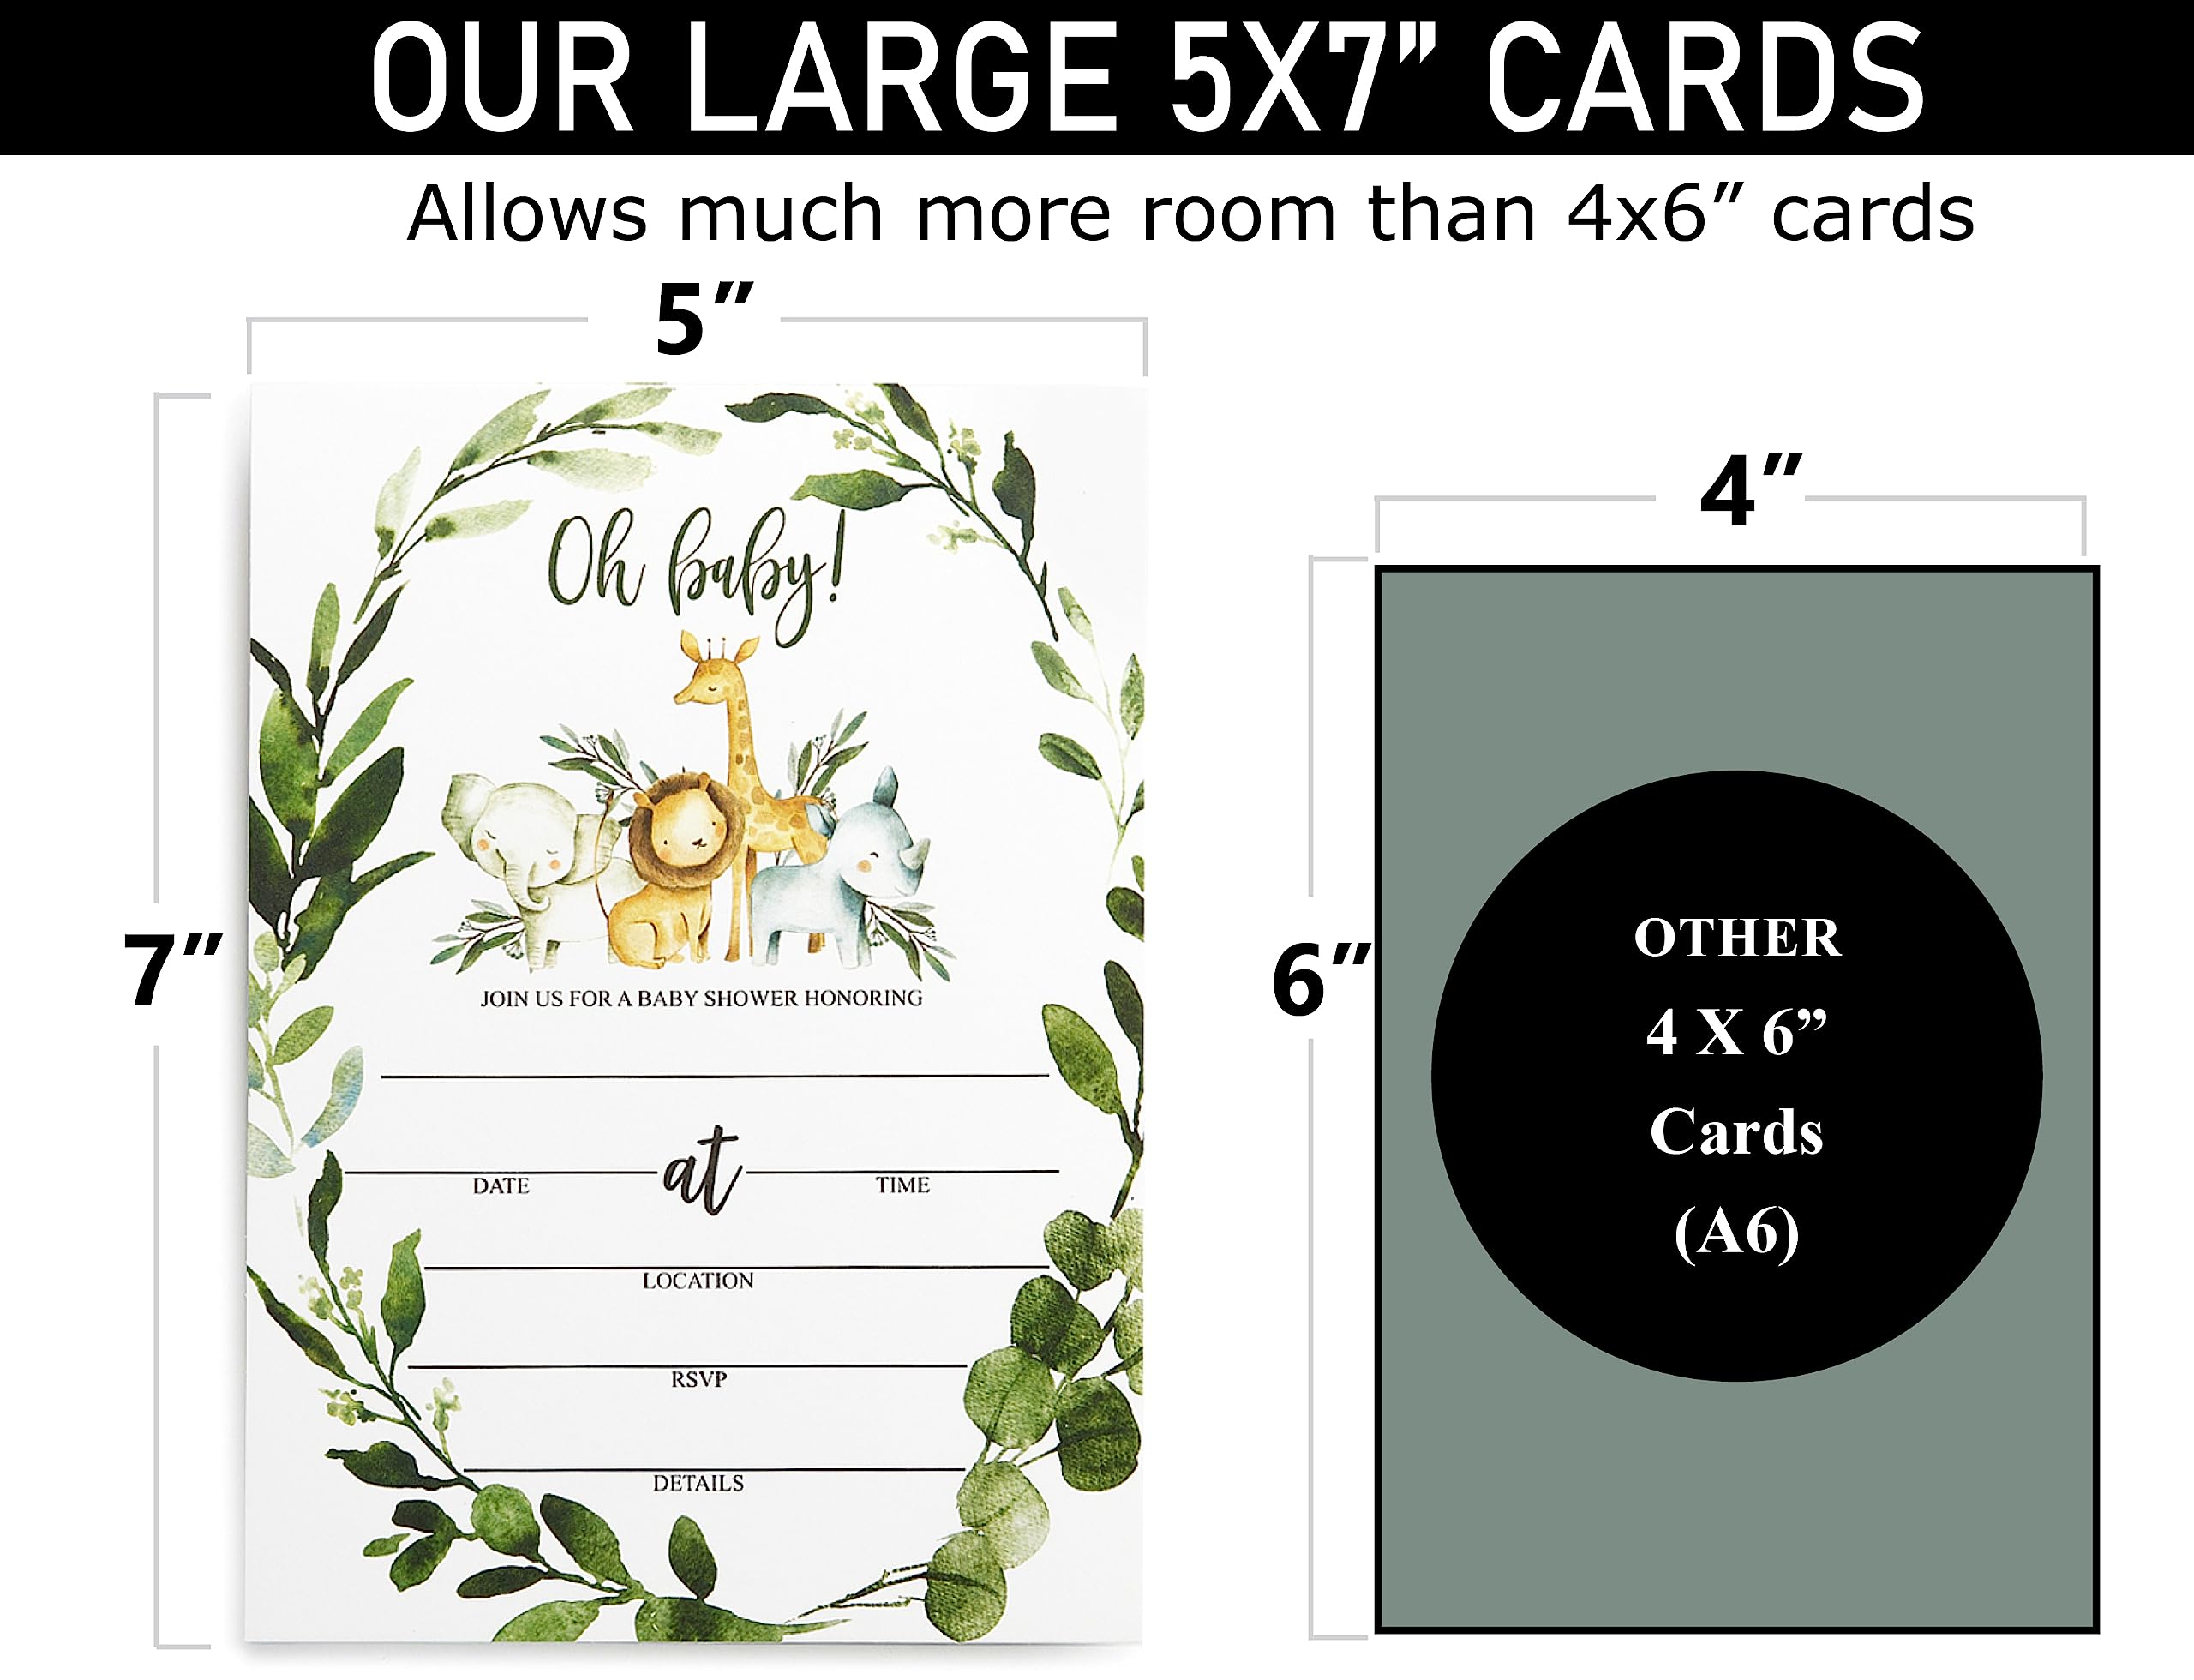 25 Boxed Wreath Safari Greenery Baby Shower Invitations (Large Size 5X7 inches), Diaper Raffle Tickets, Baby Shower Book Request Cards with Envelopes Jungle Animal Invites for Boy Neutral Baby Showers Oh Baby Sage